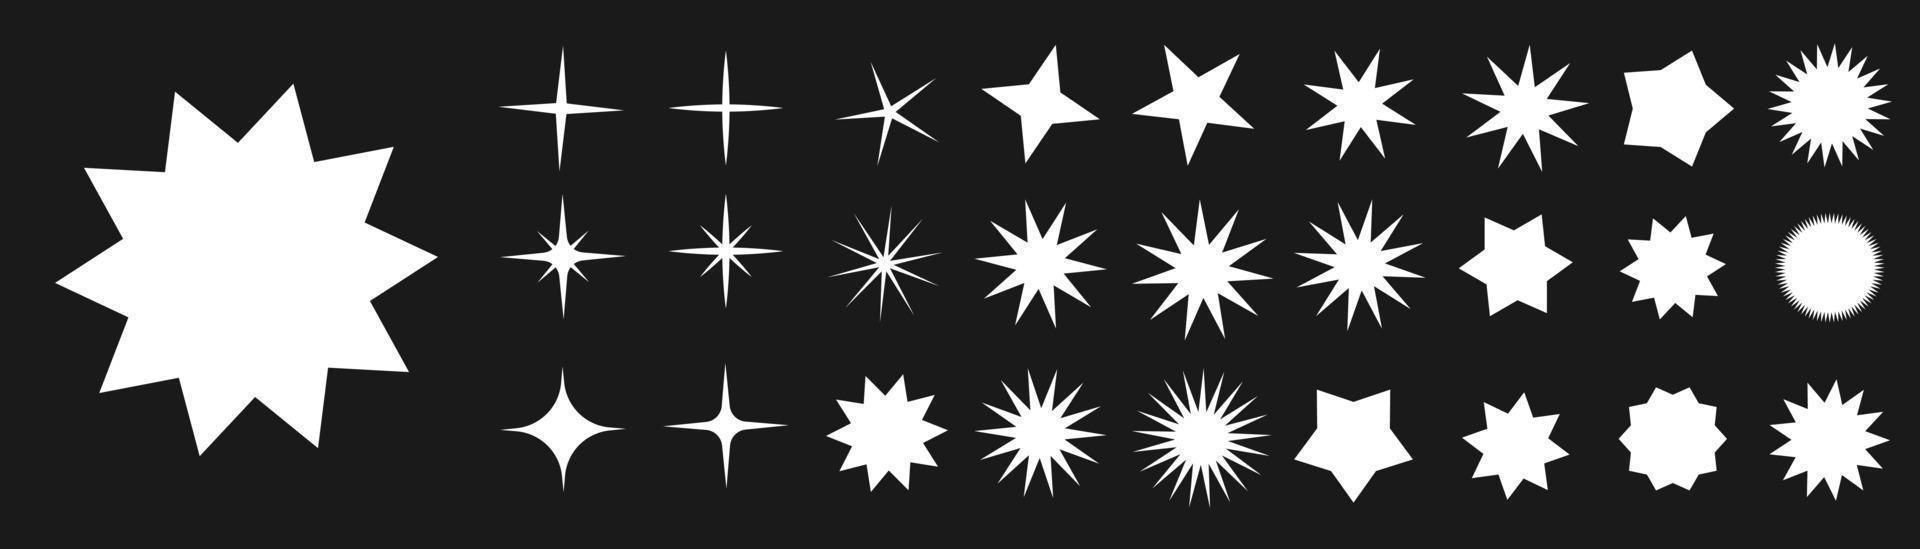 Star icon. Collection of illustrations of twinkling stars. Sparks, shining explosion in the sky. Christmas vector symbols isolated. Shine or fireworks. Vector dust. Flat design.